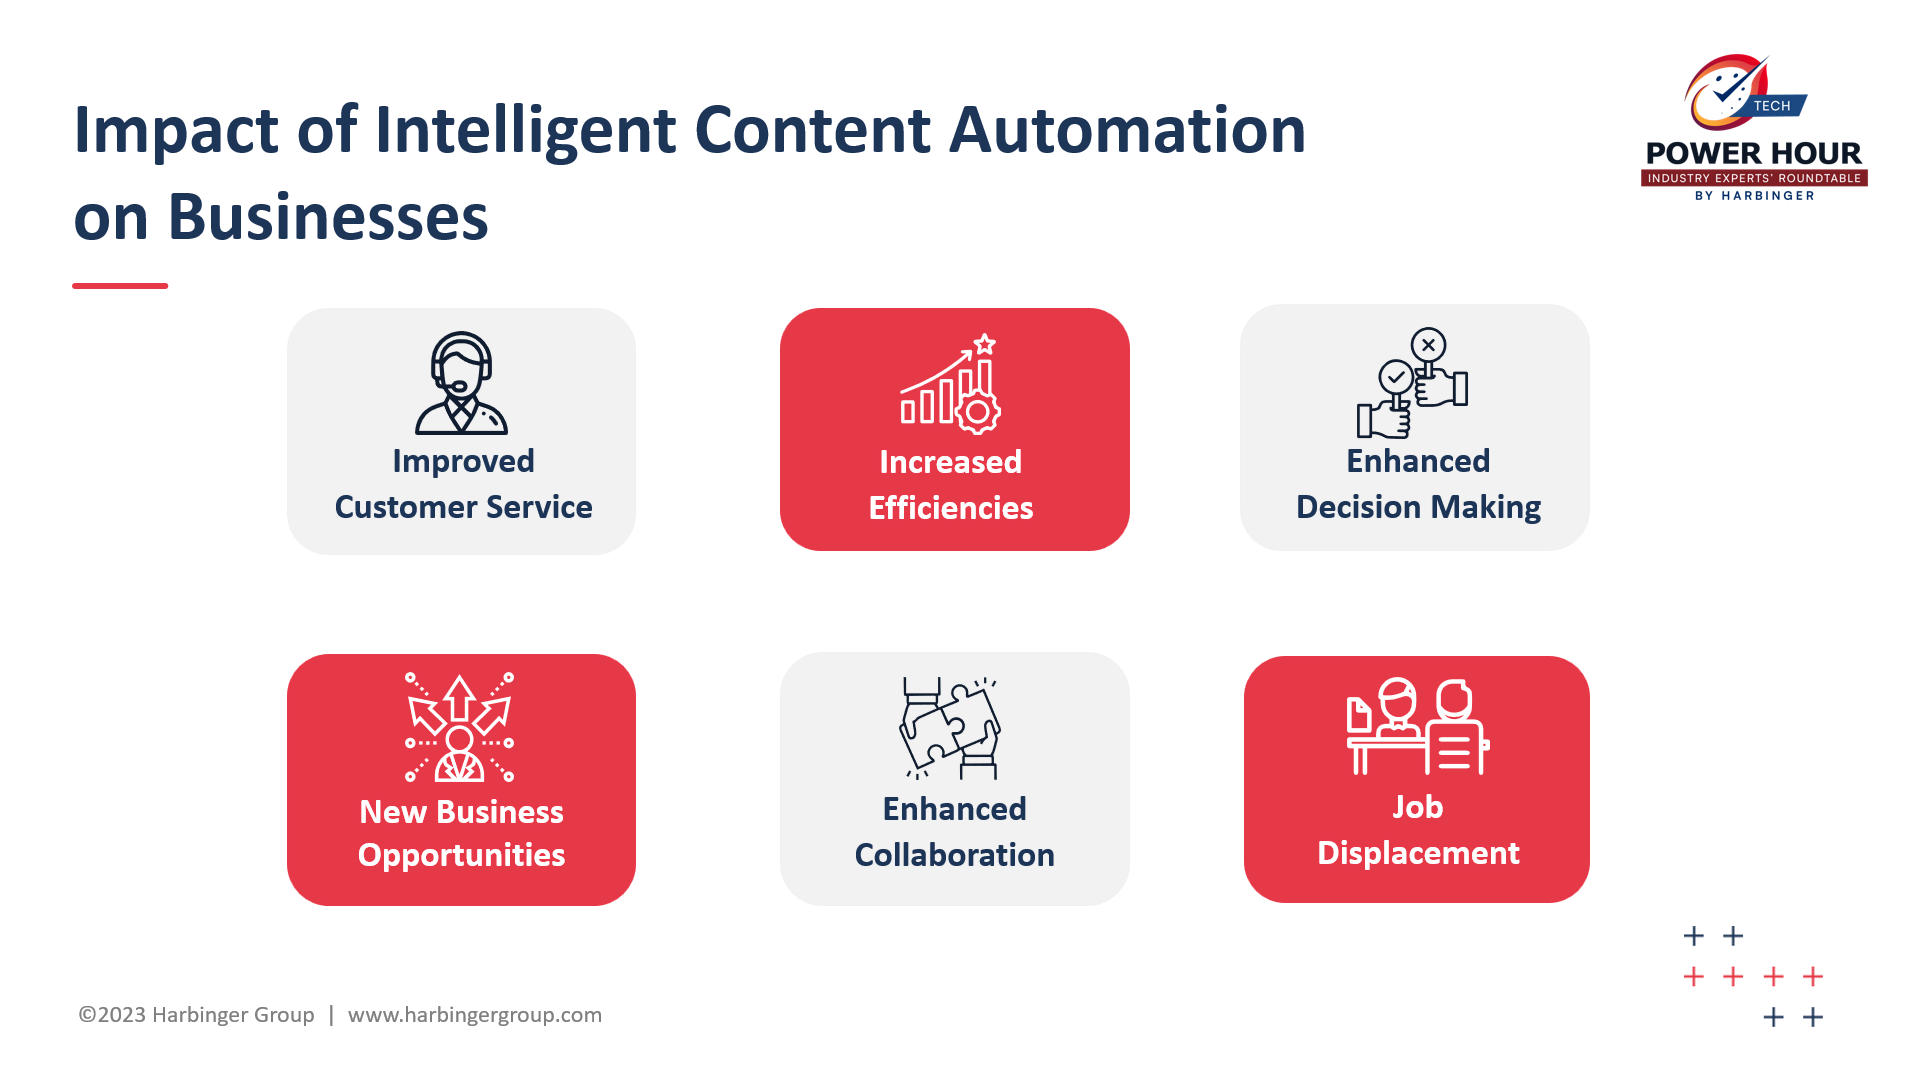 Impact of Intelligent Content Automation on Businesses